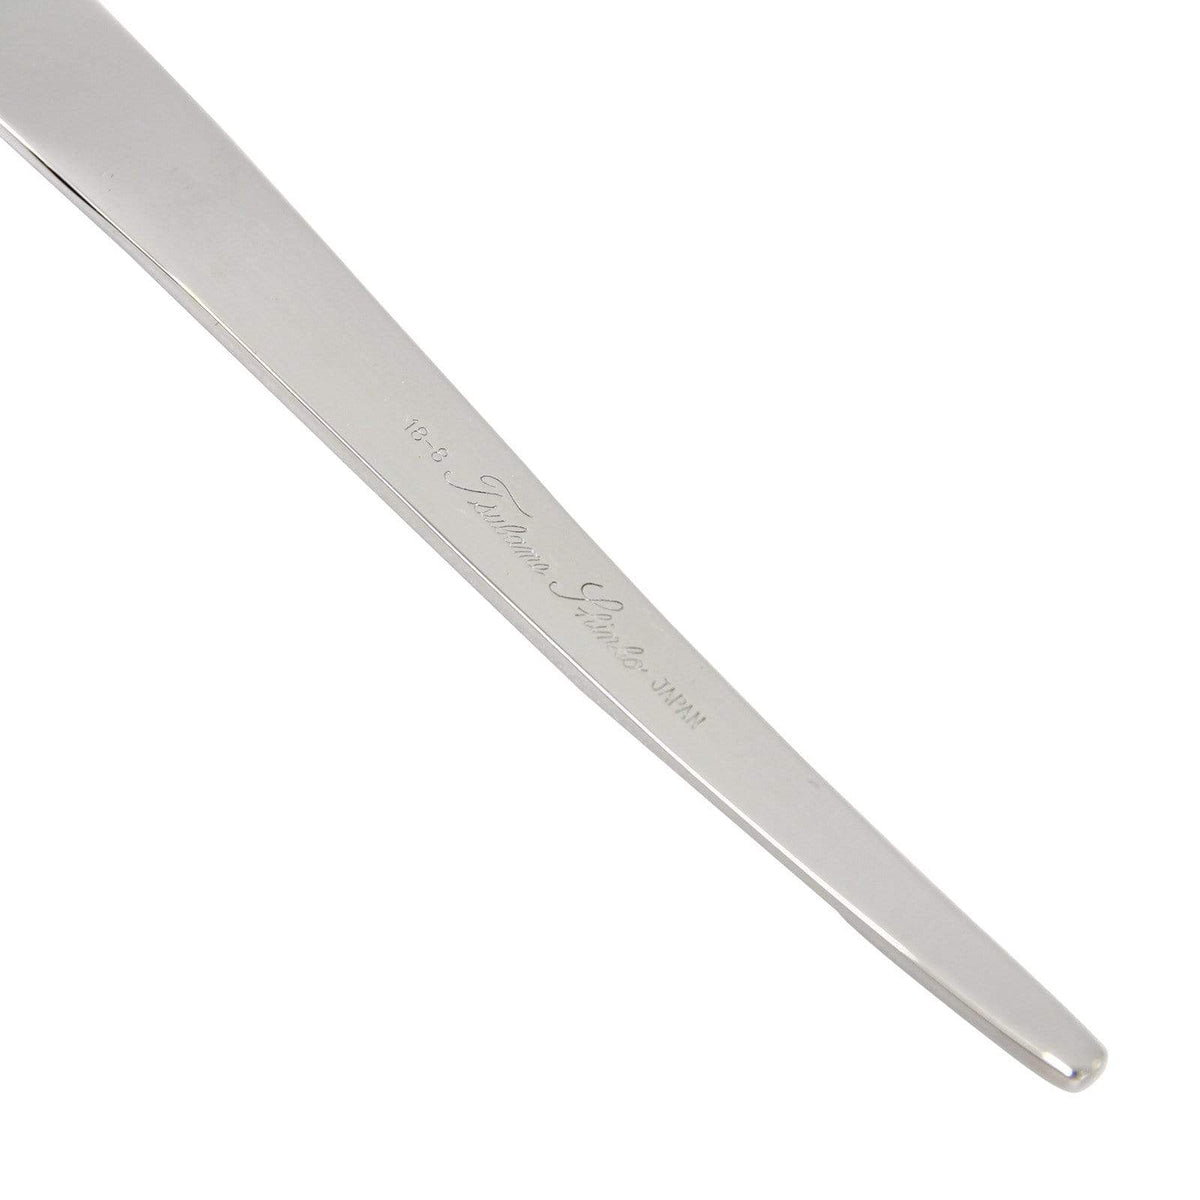 Tsubame Shinko URBAN Stainless Steel Butter Knife 14.2cm (2 Colours) Loose Cutlery